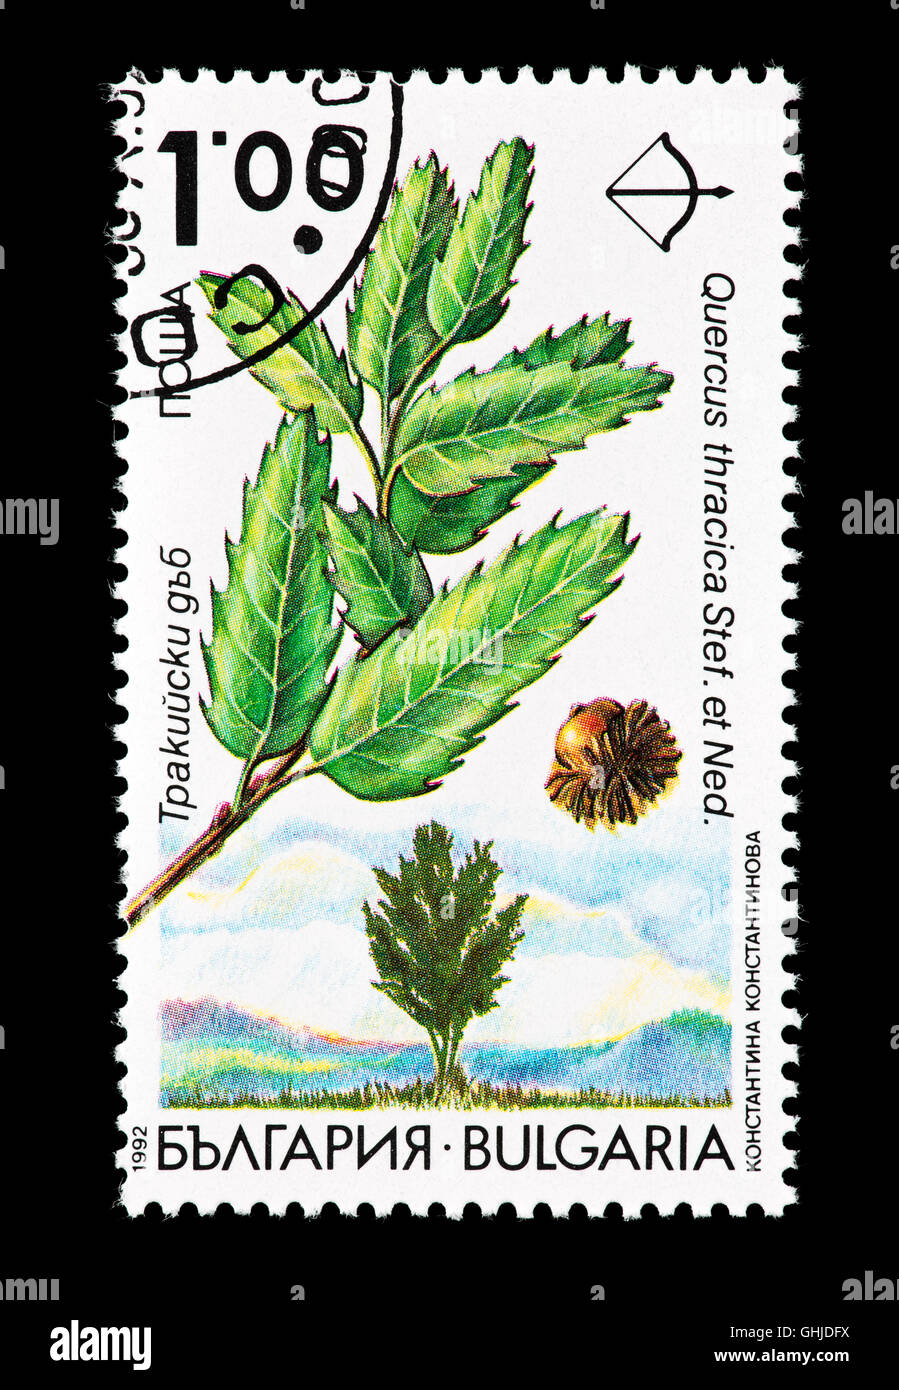 Postage stamp from Bulgaria depicting the seeds, leaves and tree of a Turkey oak or Austrian oak (Quercus thracica) Stock Photo